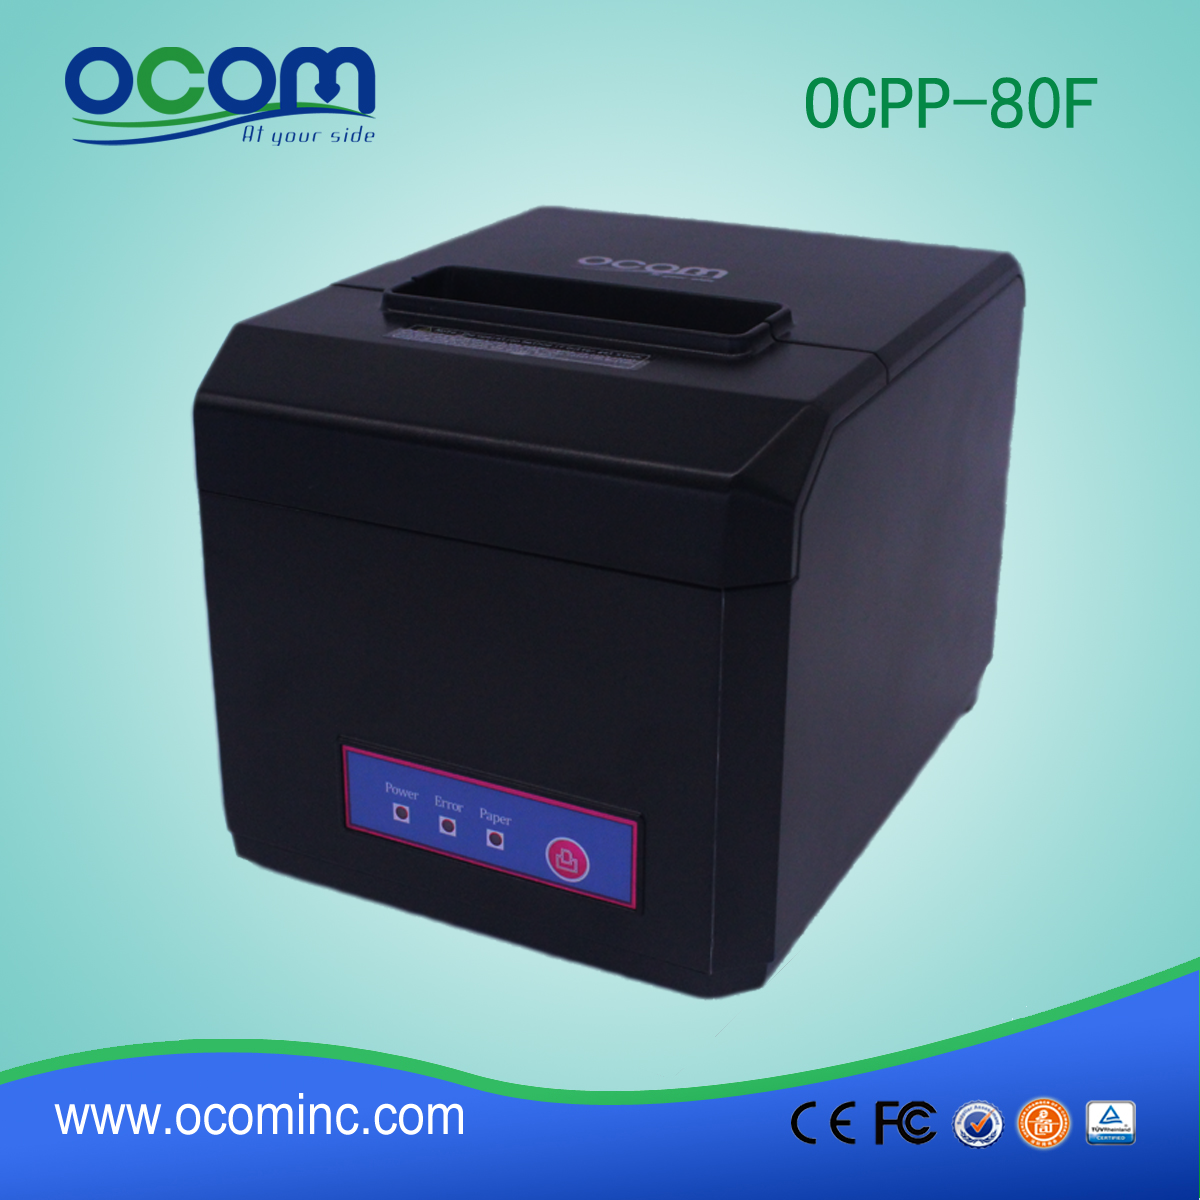 OCPP-80F 58mm and 80mm Width Paper Available POS Thermal Receipt Printer